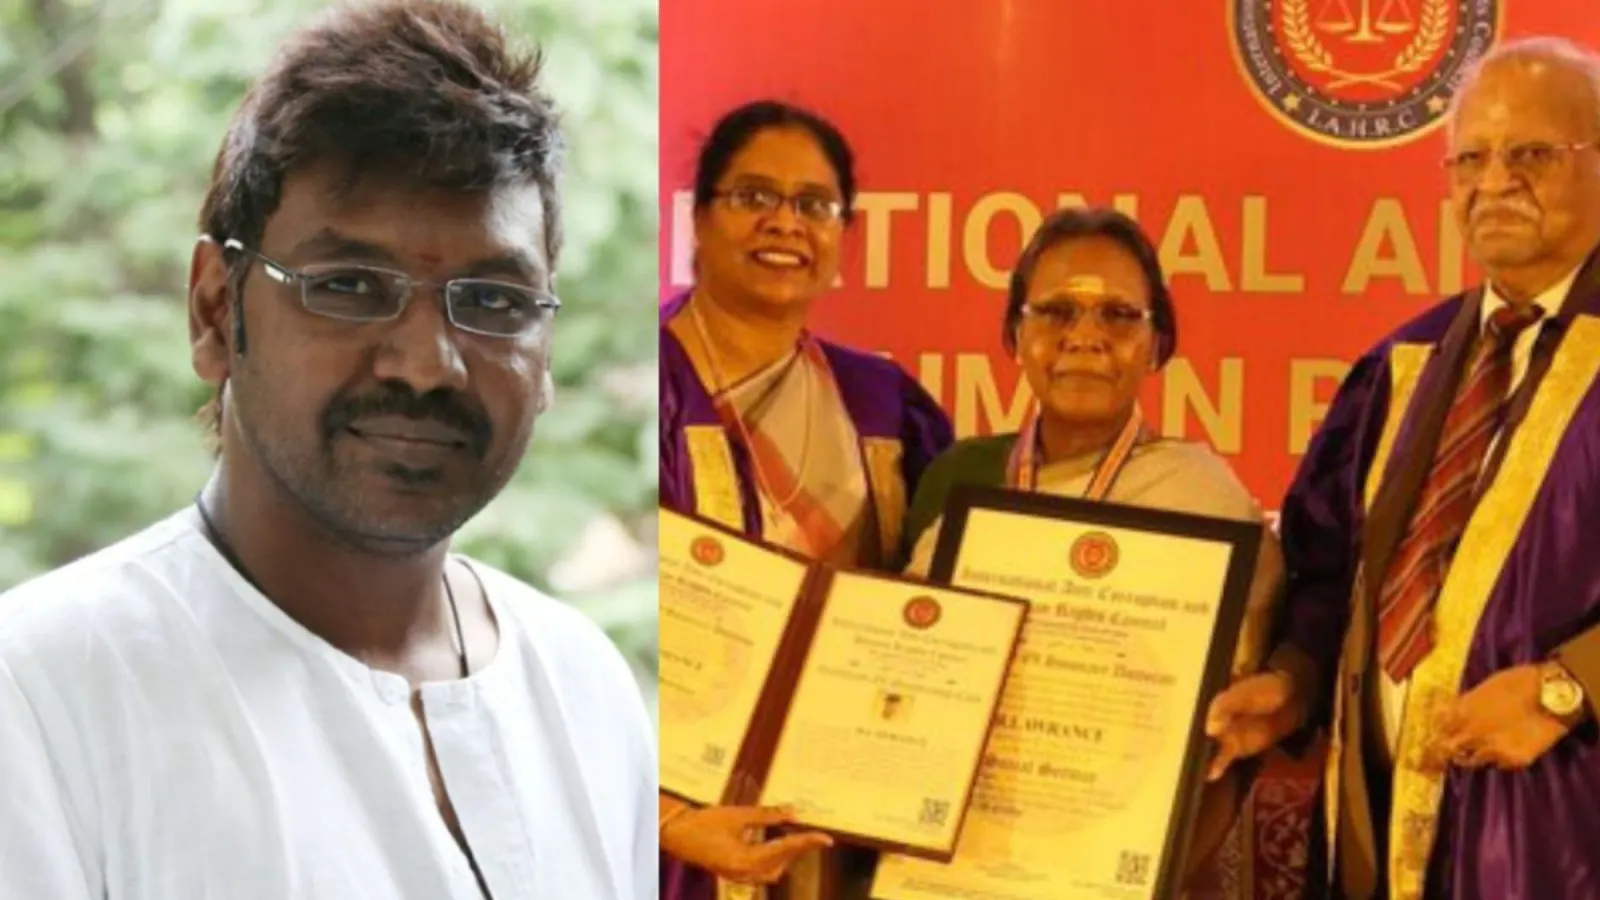 International Body Honours Actor Raghava Lawrence With Doctorate For Social Service